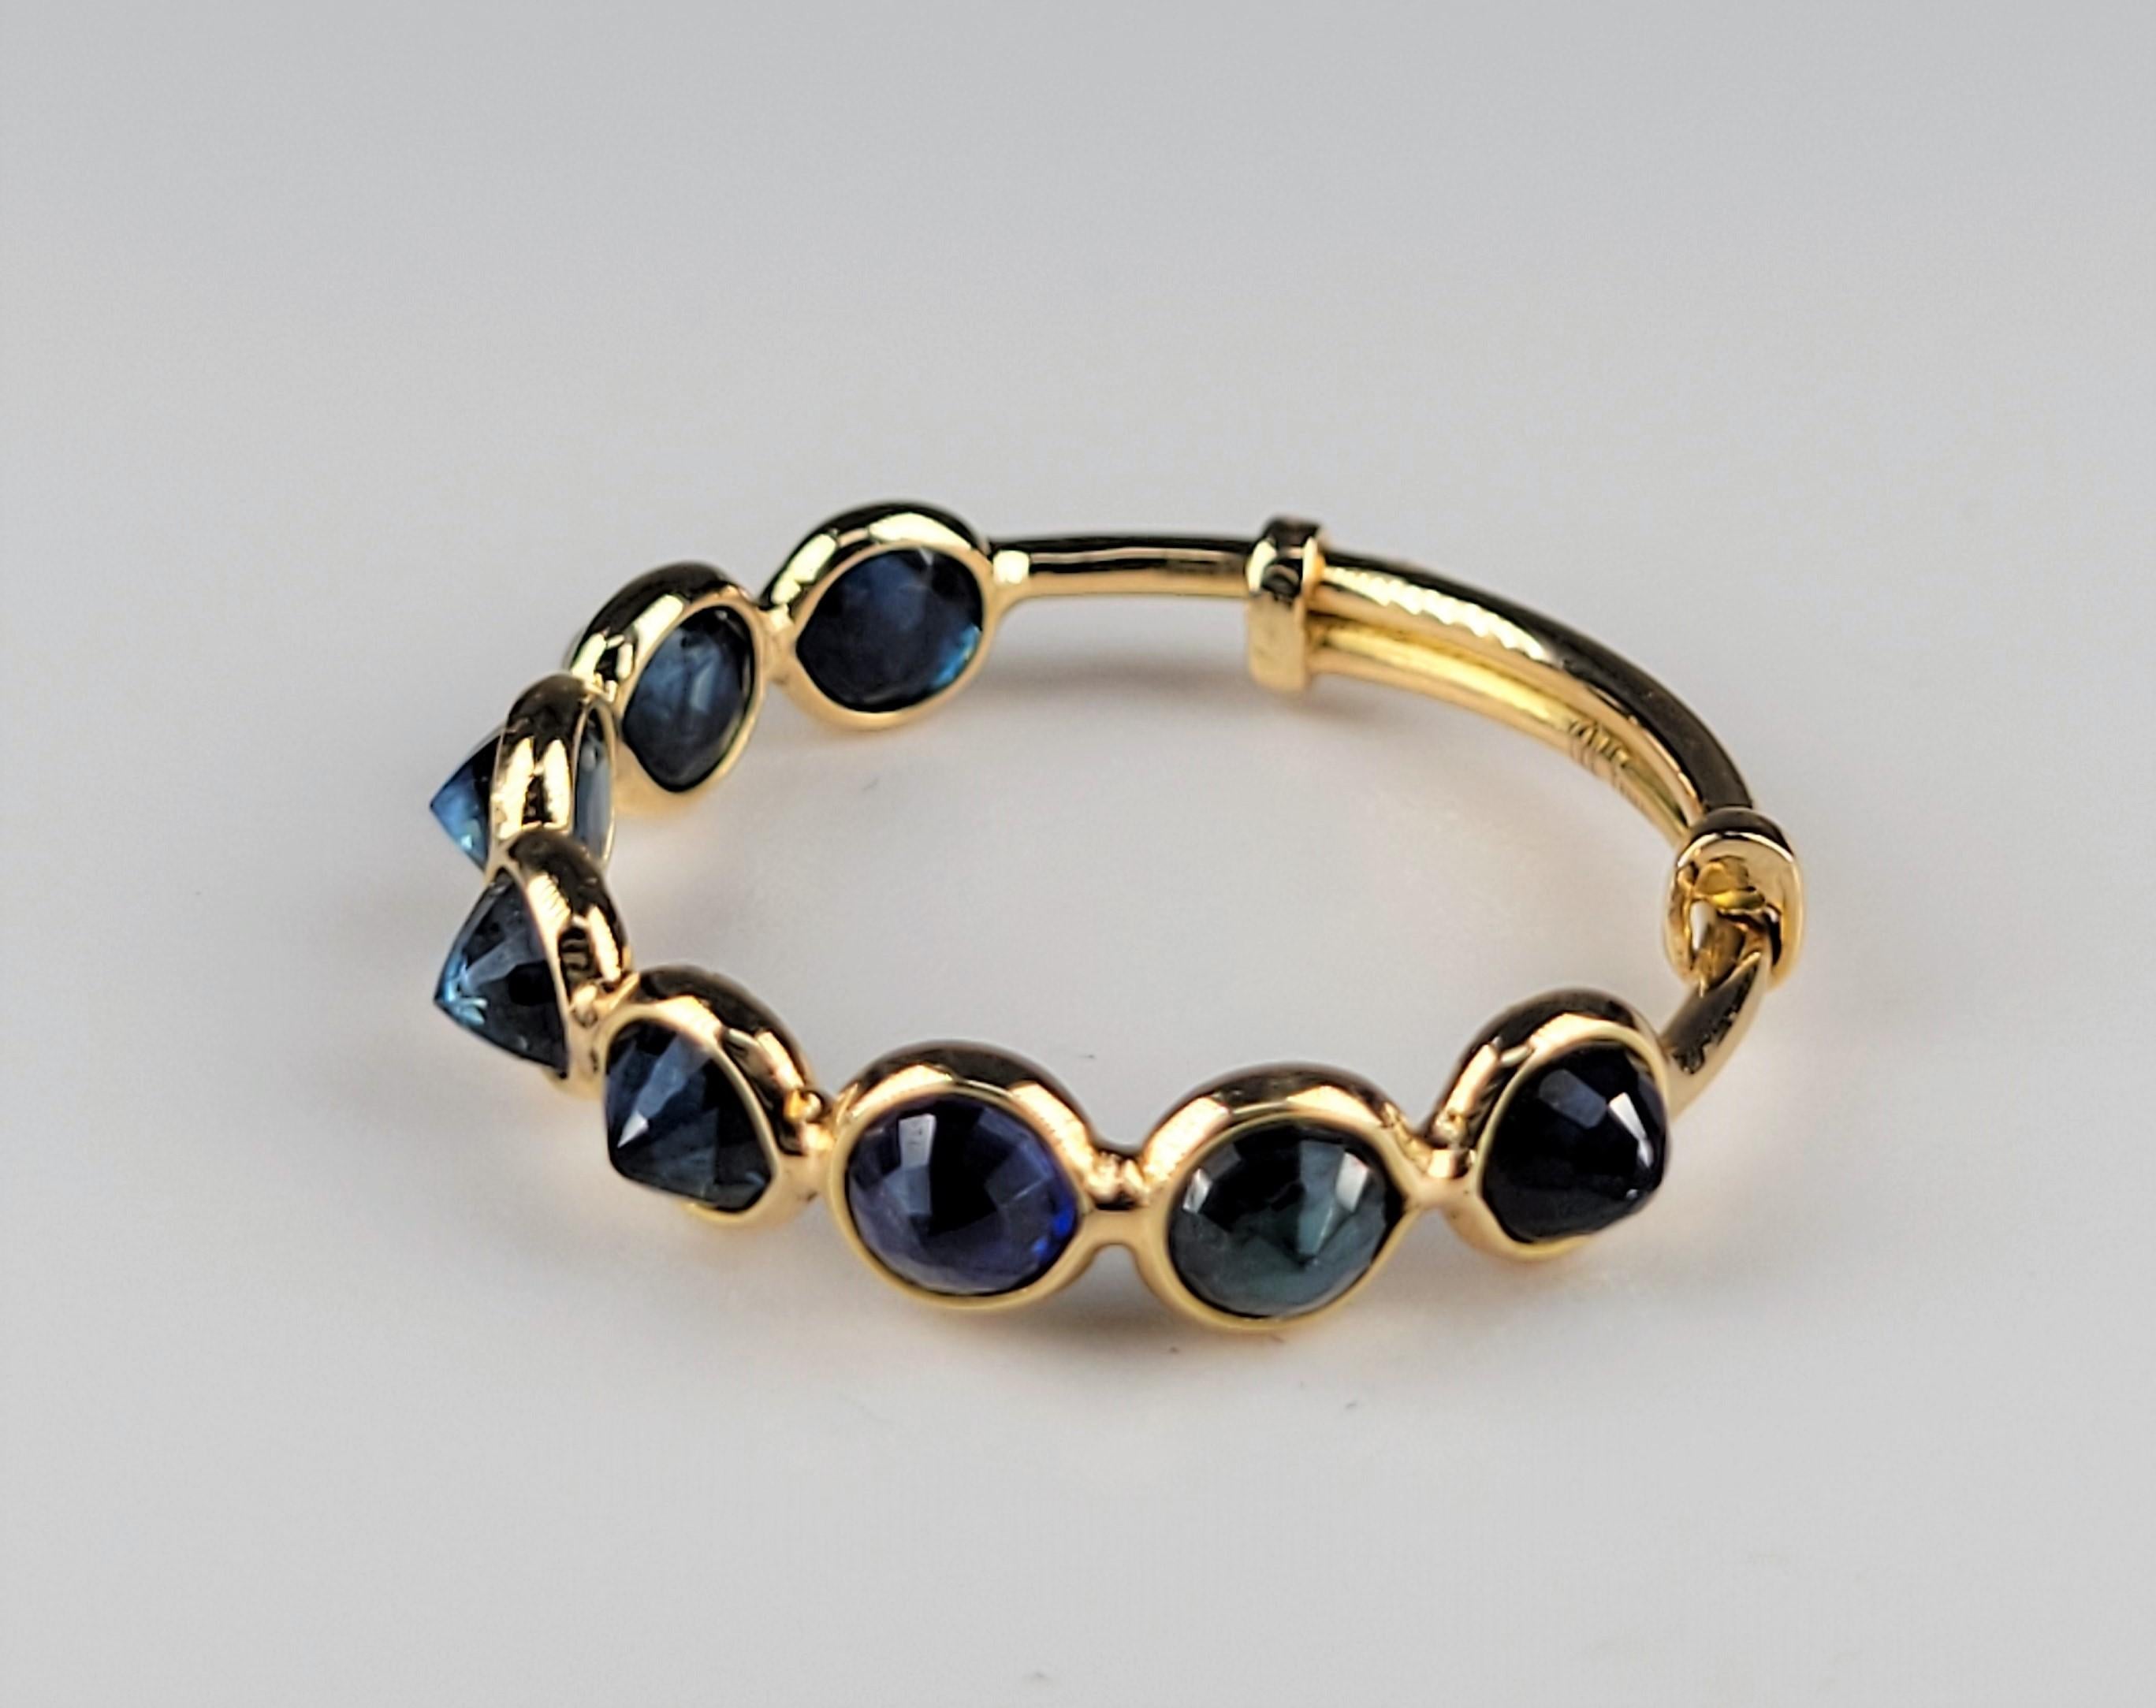 Inverted blue sapphires are striking against the 18 karat yellow gold, adjustable mounting!